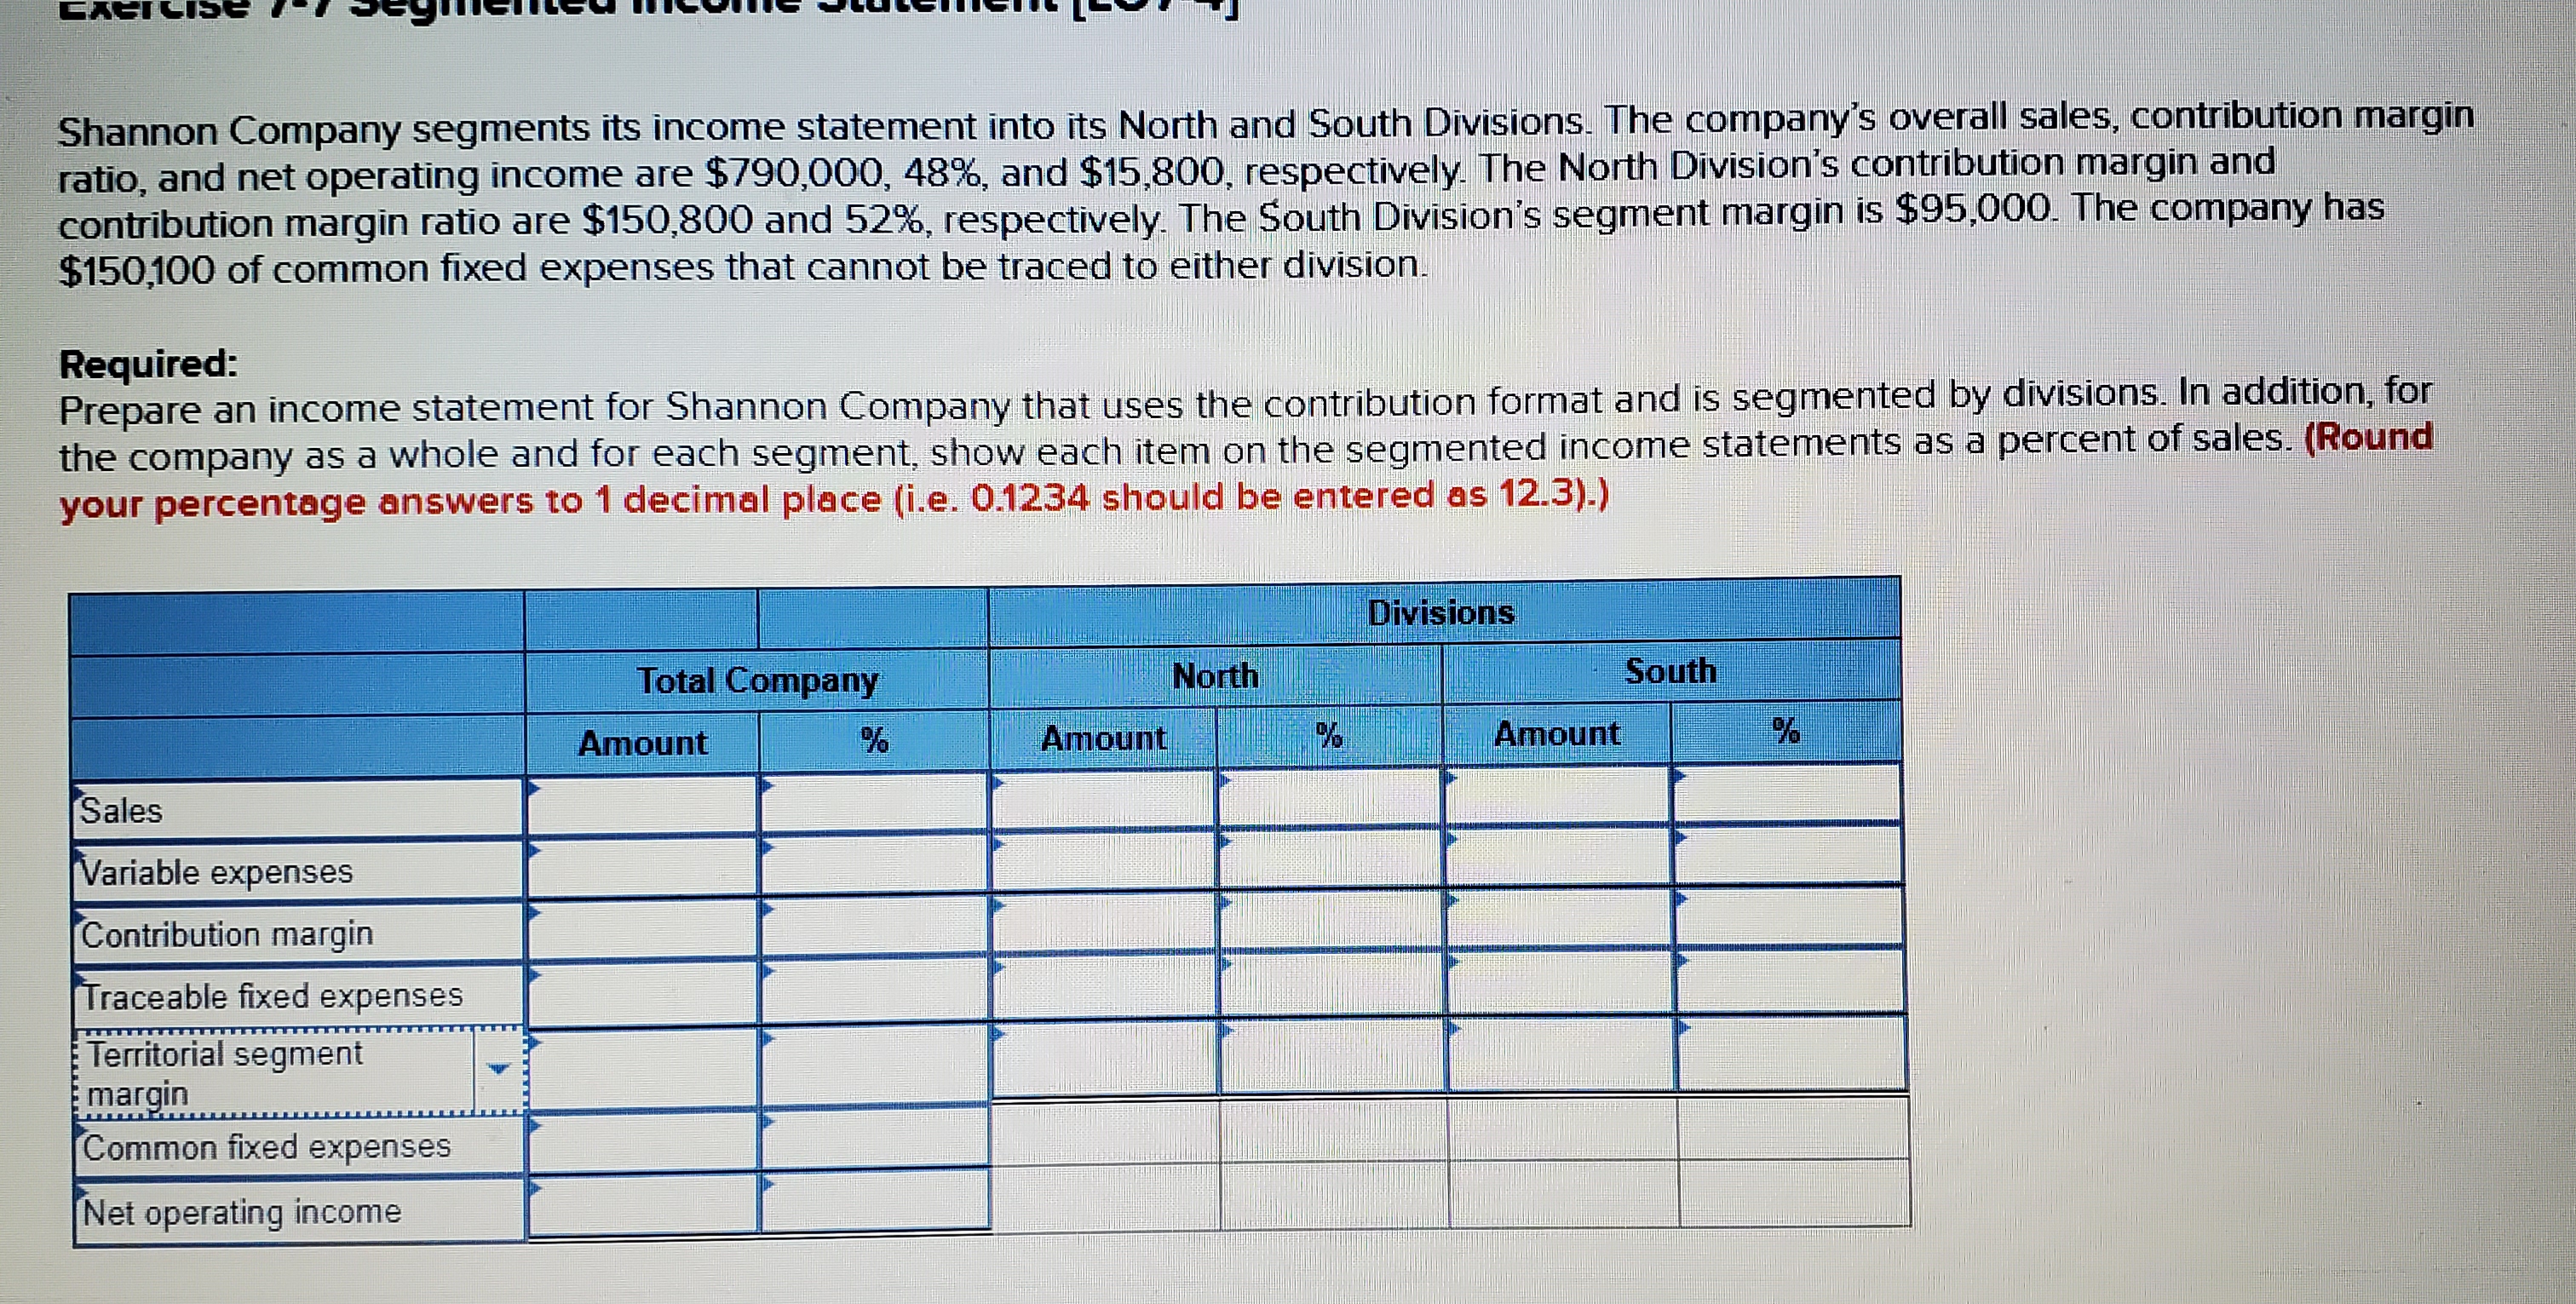 CACI
Shannon Company segments its income statement into its North and South Divisions. The company's overall sales, contribution margin
ratio, and net operating income are $790,000, 48%, and $15,800, respectively. The North Division's contribution margin and
contribution margin ratio are $150,800 and 52%, respectively. The South Division's segment margin is $95,000. The company has
$150,100 of common fixed expenses that cannot be traced to either division.
Required:
Prepare an income statement for Shannon Company that uses the contribution format and is segmented by divisions. In addition, for
the company as a whole and for each segment, show each item on the segmented income statements as a percent of sales. (Round
your percentage answers to 1 decimal place (i.e. 0.1234 should be entered as 12.3).)
Divisions
Total Company
North
South
Amount
Amount
Amount
Sales
Variable expenses
Contribution margin
Traceable fixed expenses
Territorial segment
margin
Common fixed expenses
Net operating income
